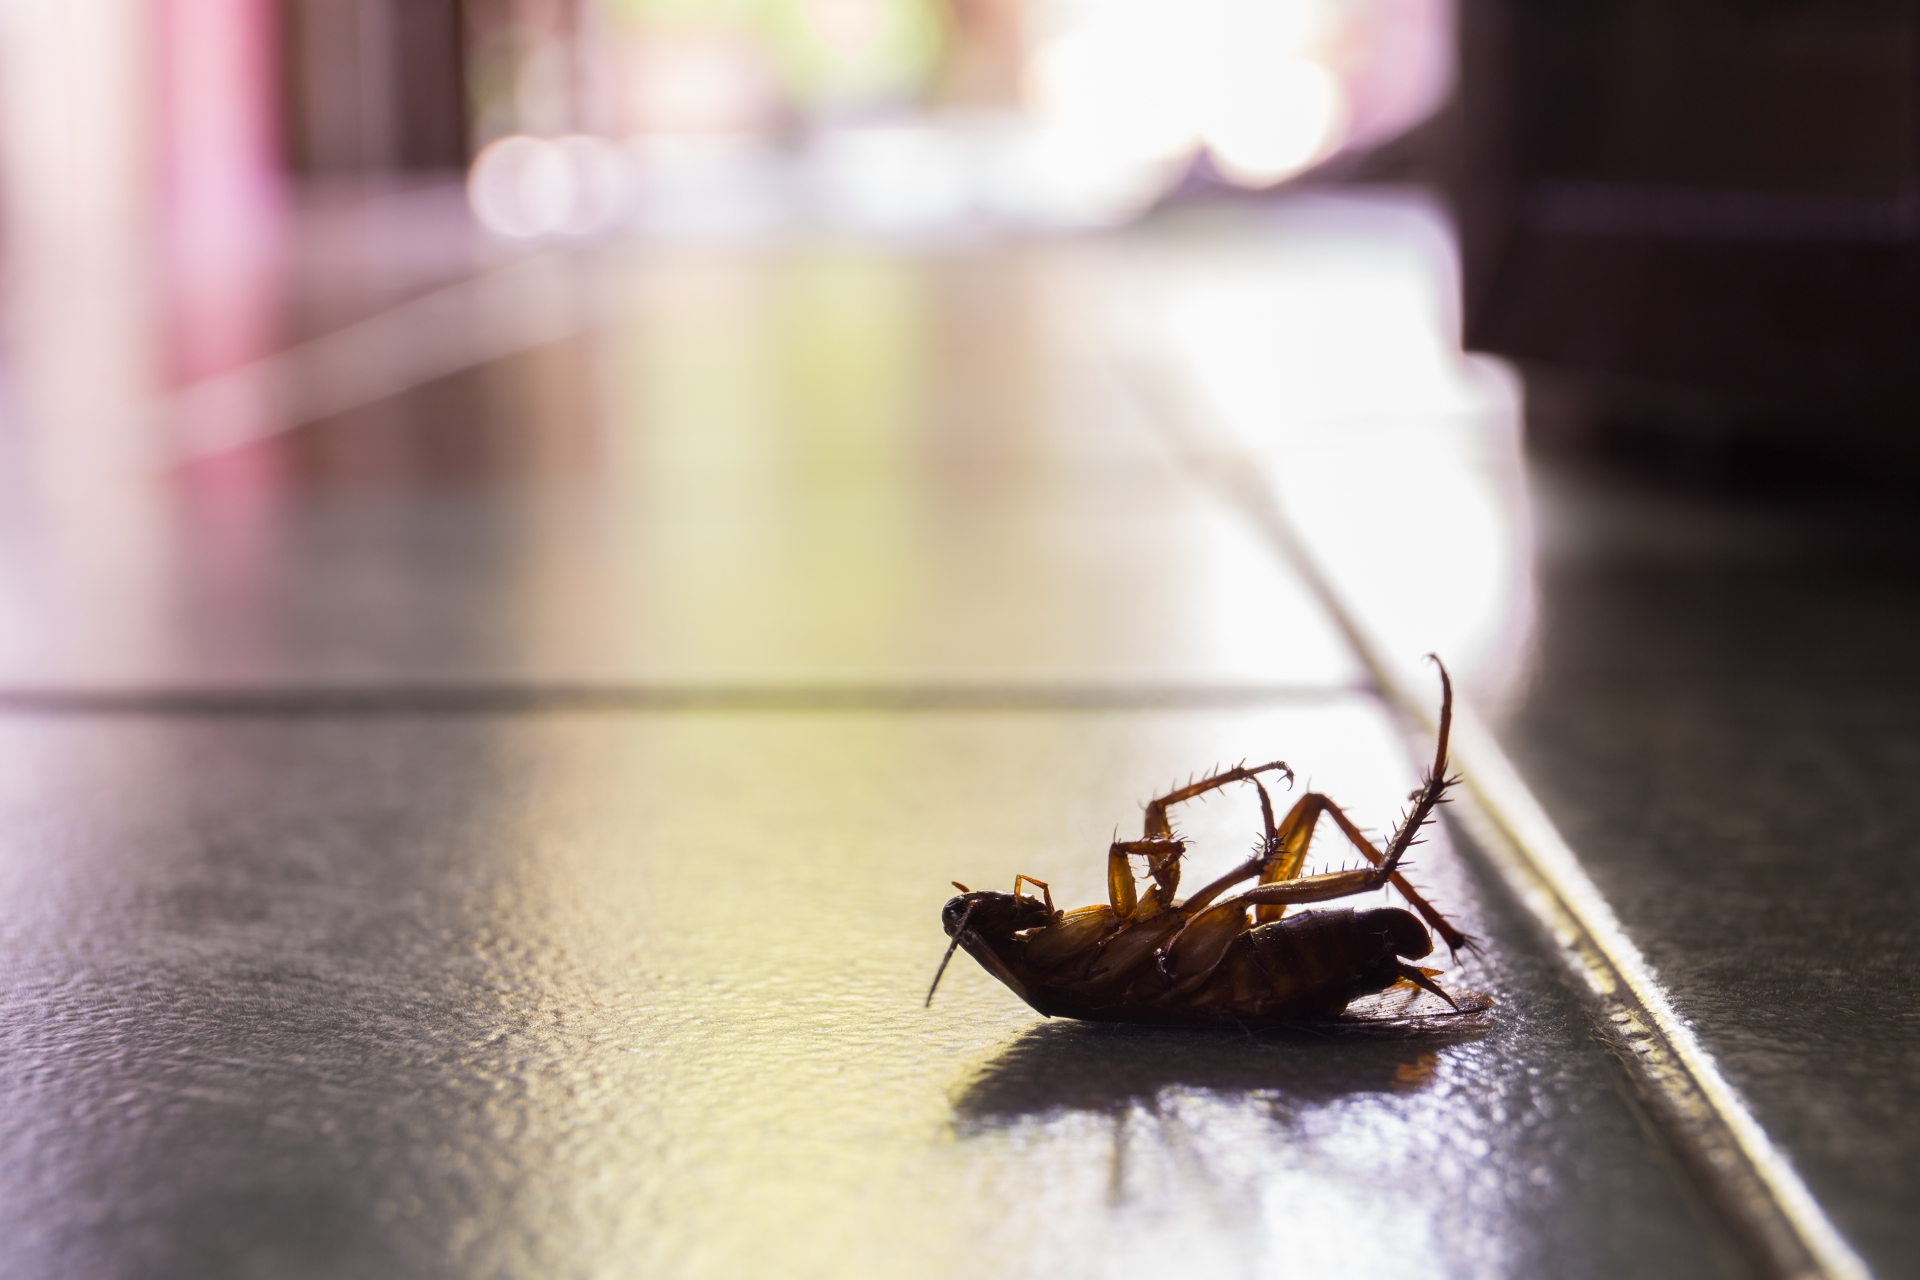 Cockroach Control, Pest Control in Stockley Park, UB11. Call Now 020 8166 9746